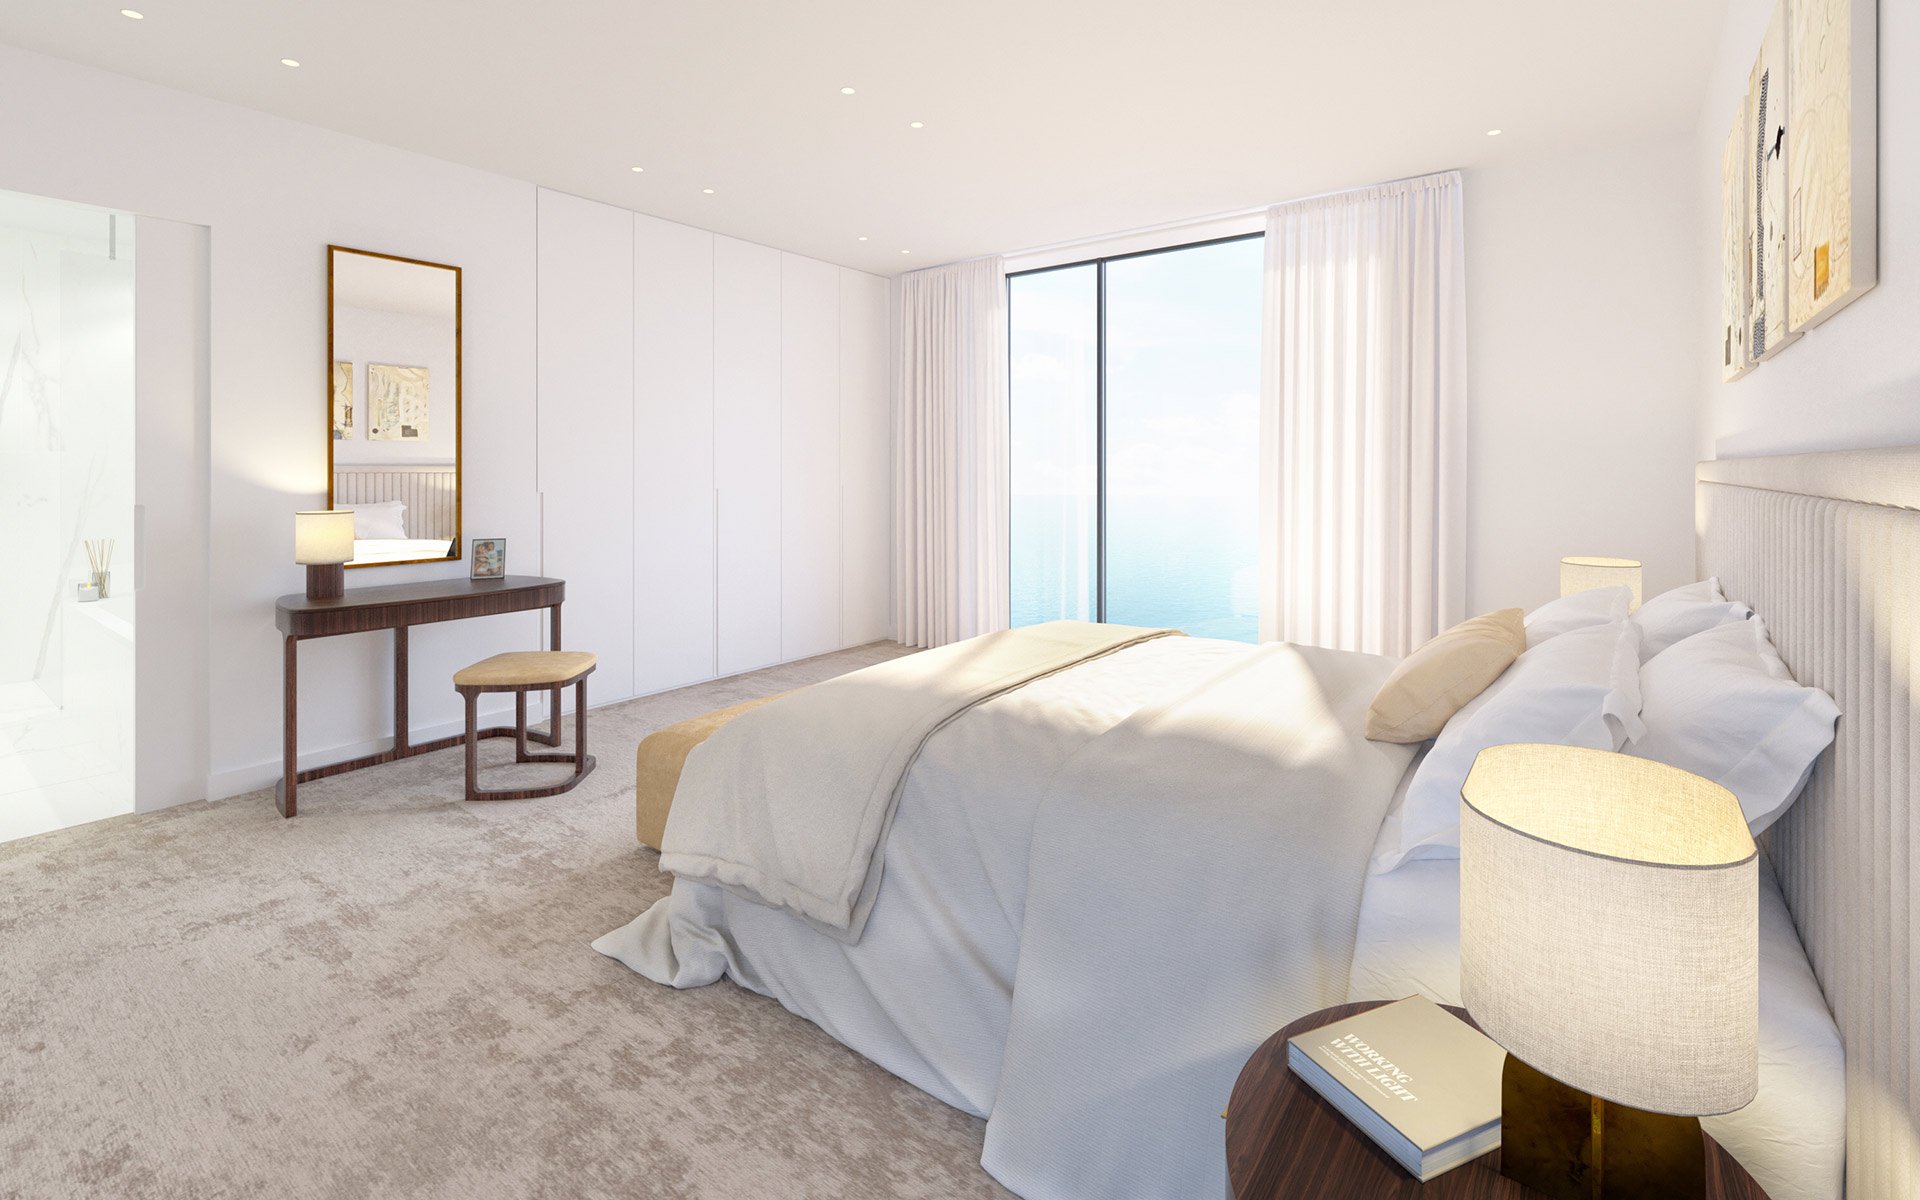 luxury bedroom with views over the channel at the leas pavilion project in folkestone